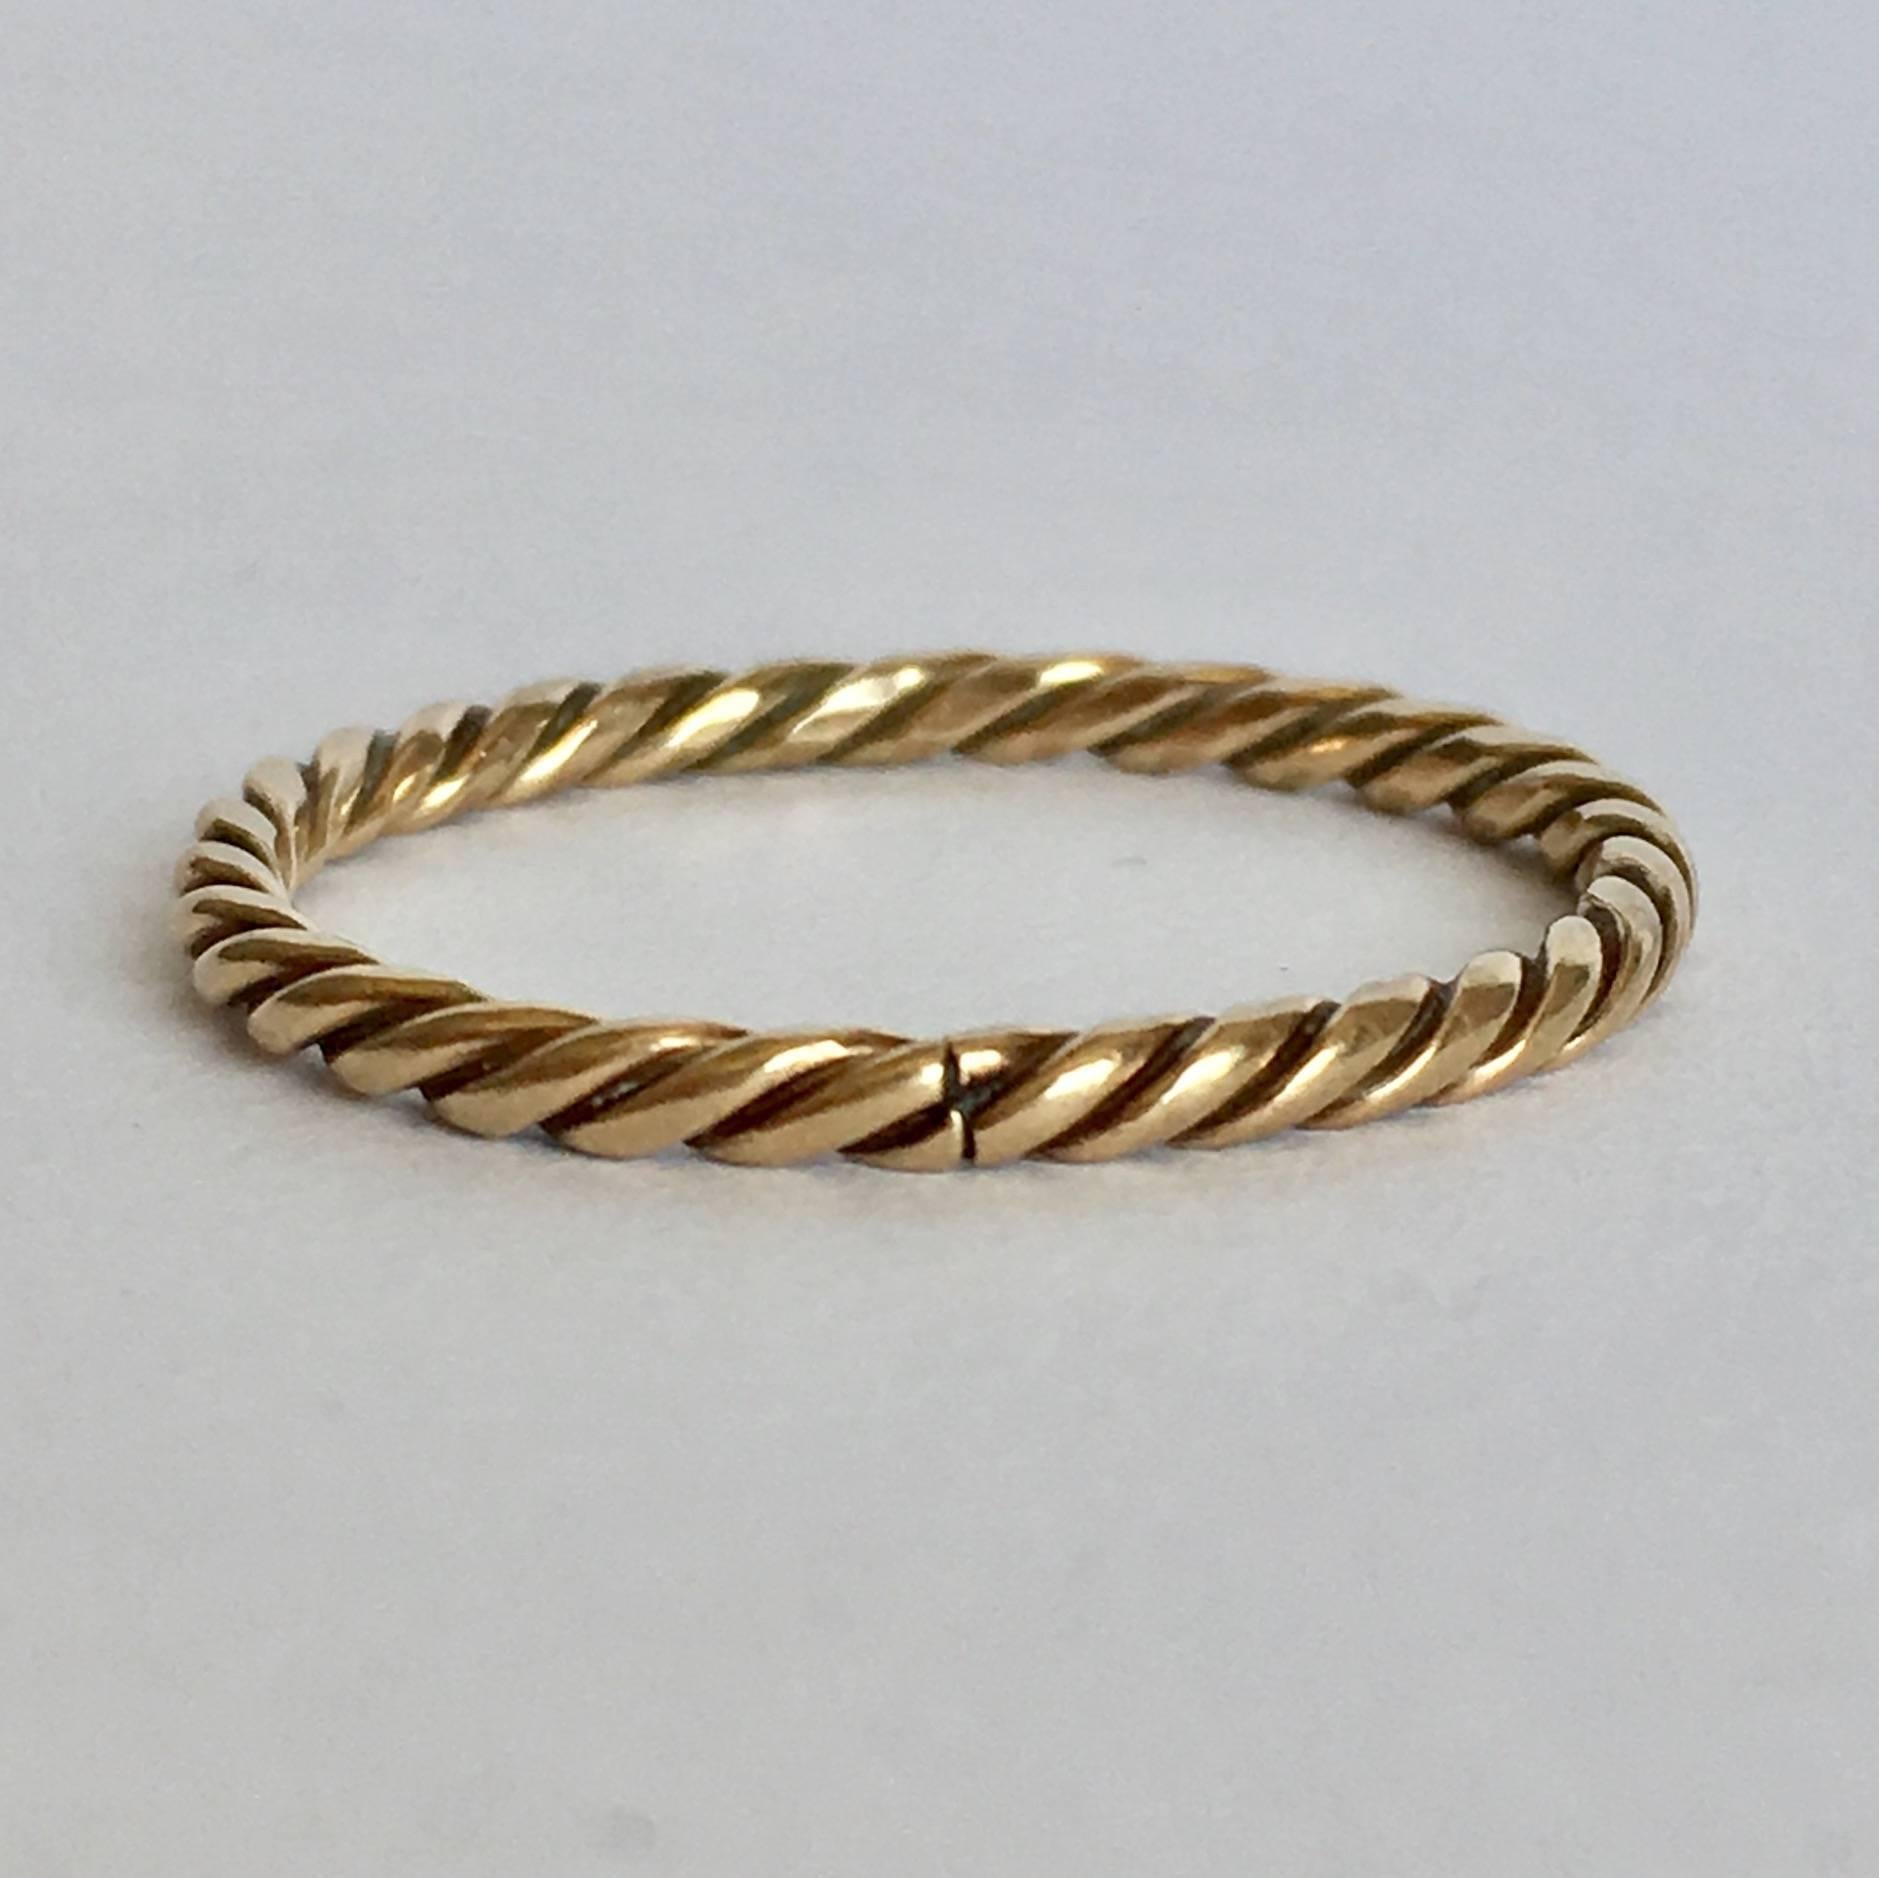 A simple twisted 9ct gold band, this ring is beautifully elegant. Worn alone, it looks understated and cool. Alternatively, it makes the perfect stacking band to layer up with other favourites - or, it could be attached to a chain and used as a